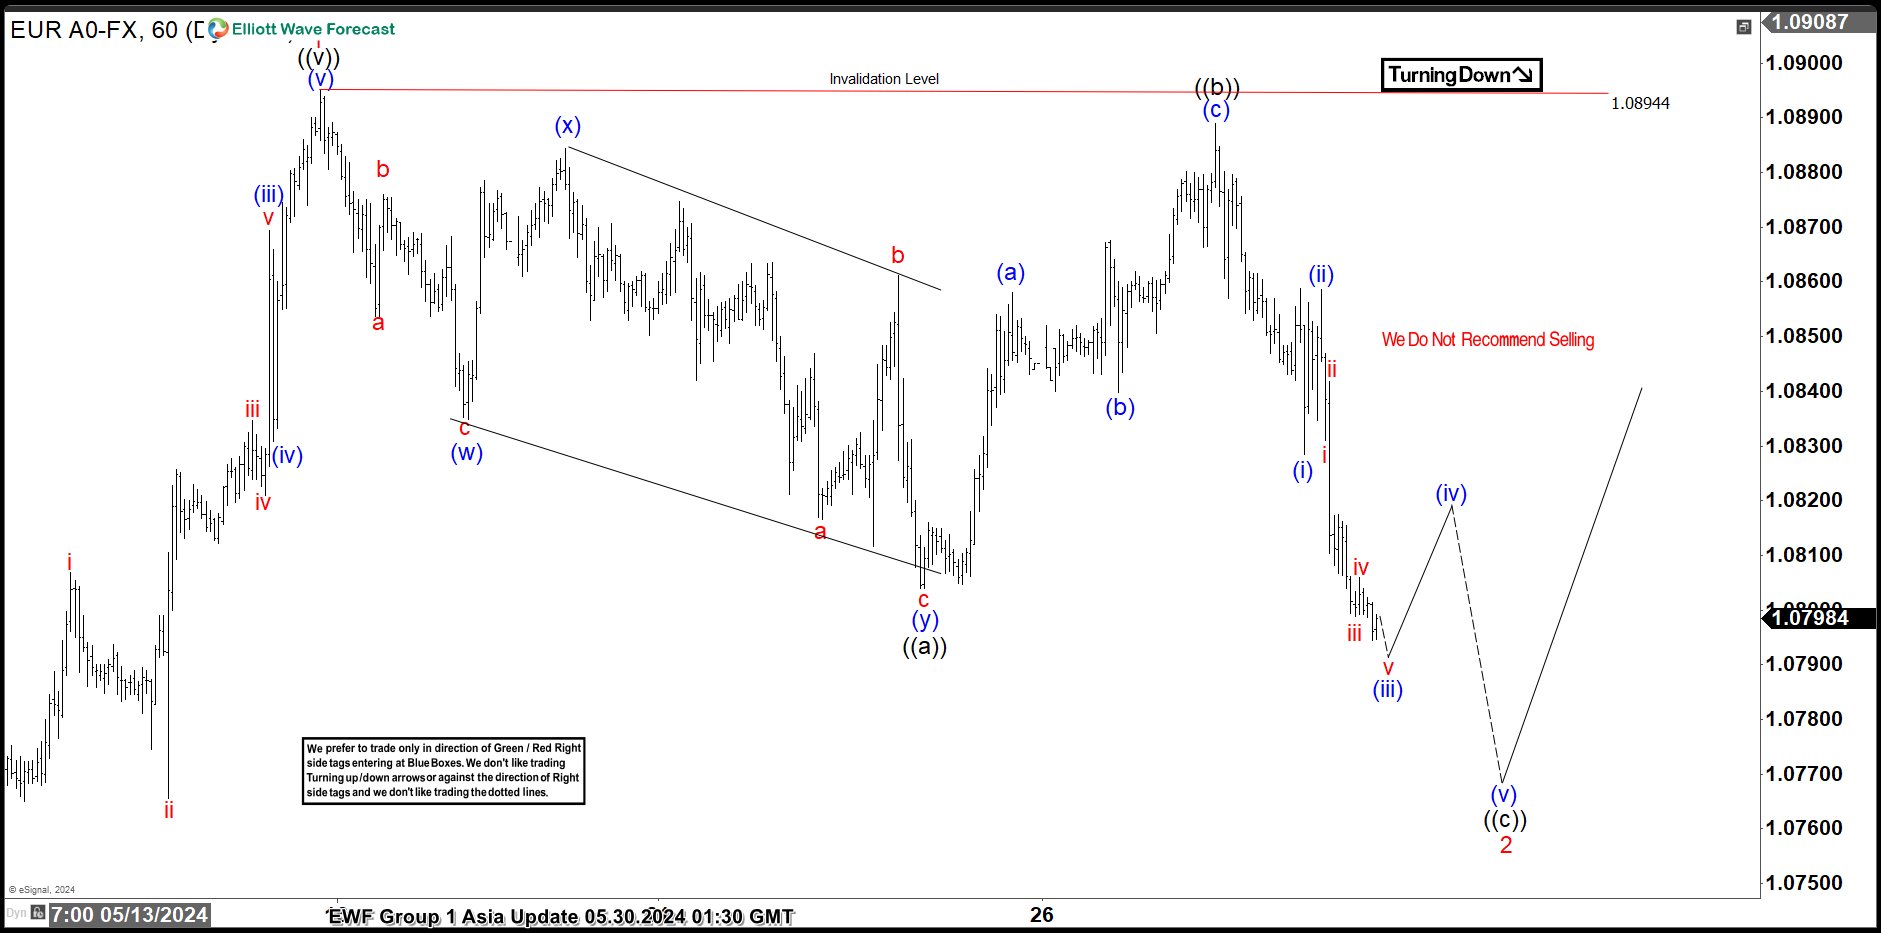 Elliott Wave Analysis Expects a Flat Correction as Wave 2 in EURUSD